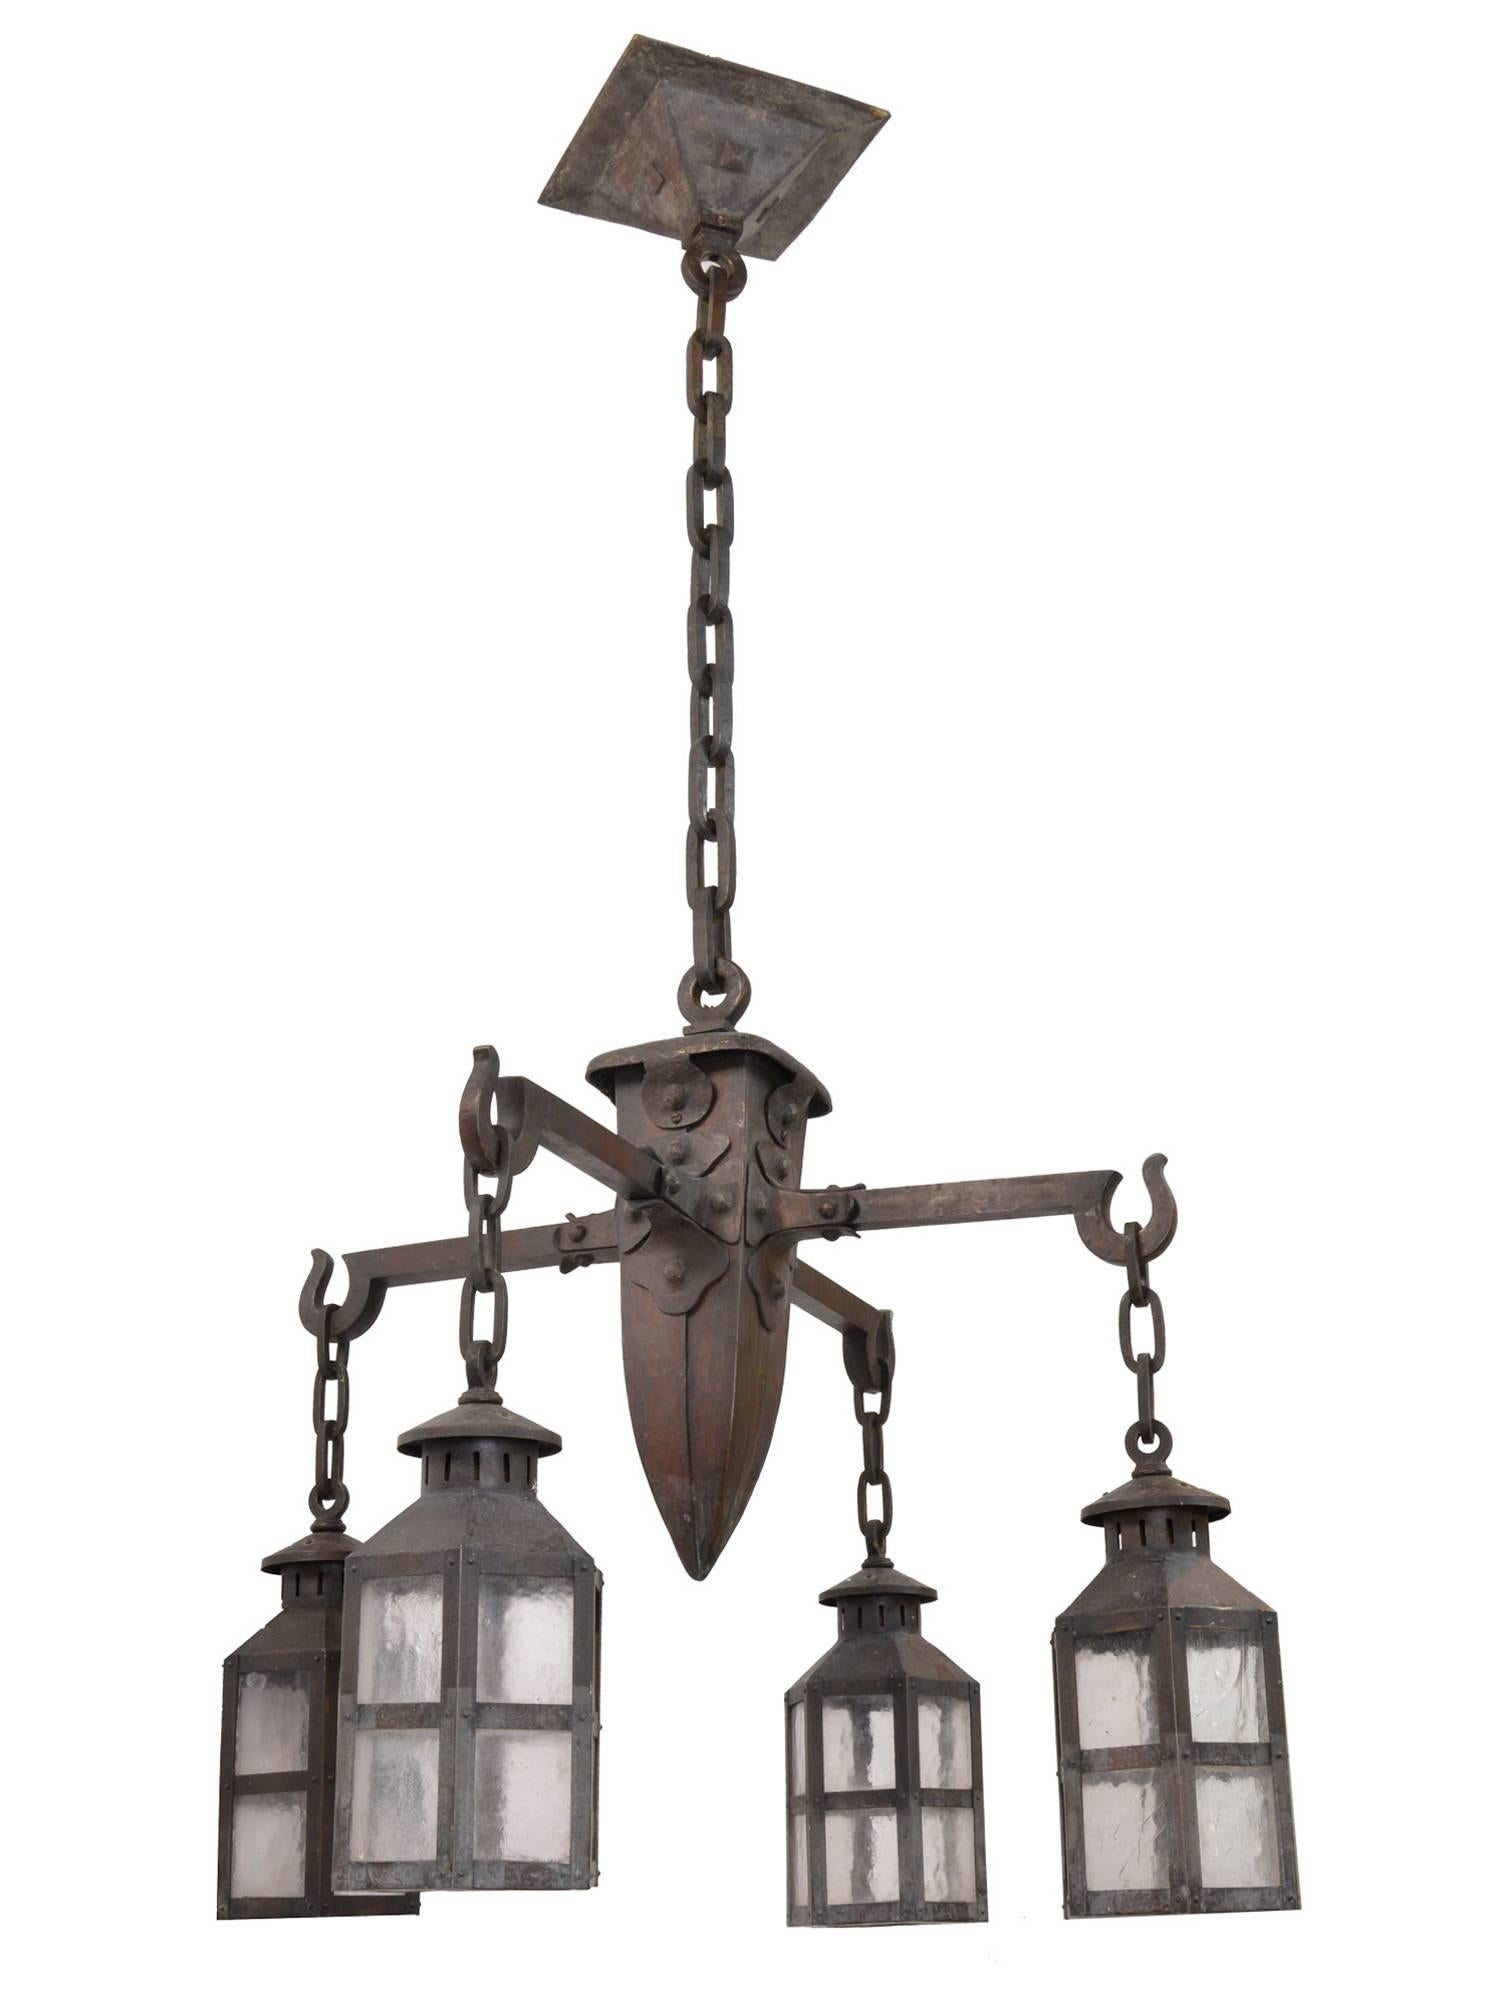 This authentic Arts and Crafts chandelier has a great mix of details that make it truly special. Incorporated are utilitarian shapes, functionality, and handcrafted ornamentation that defines Arts and Crafts design sensibilities. With its original